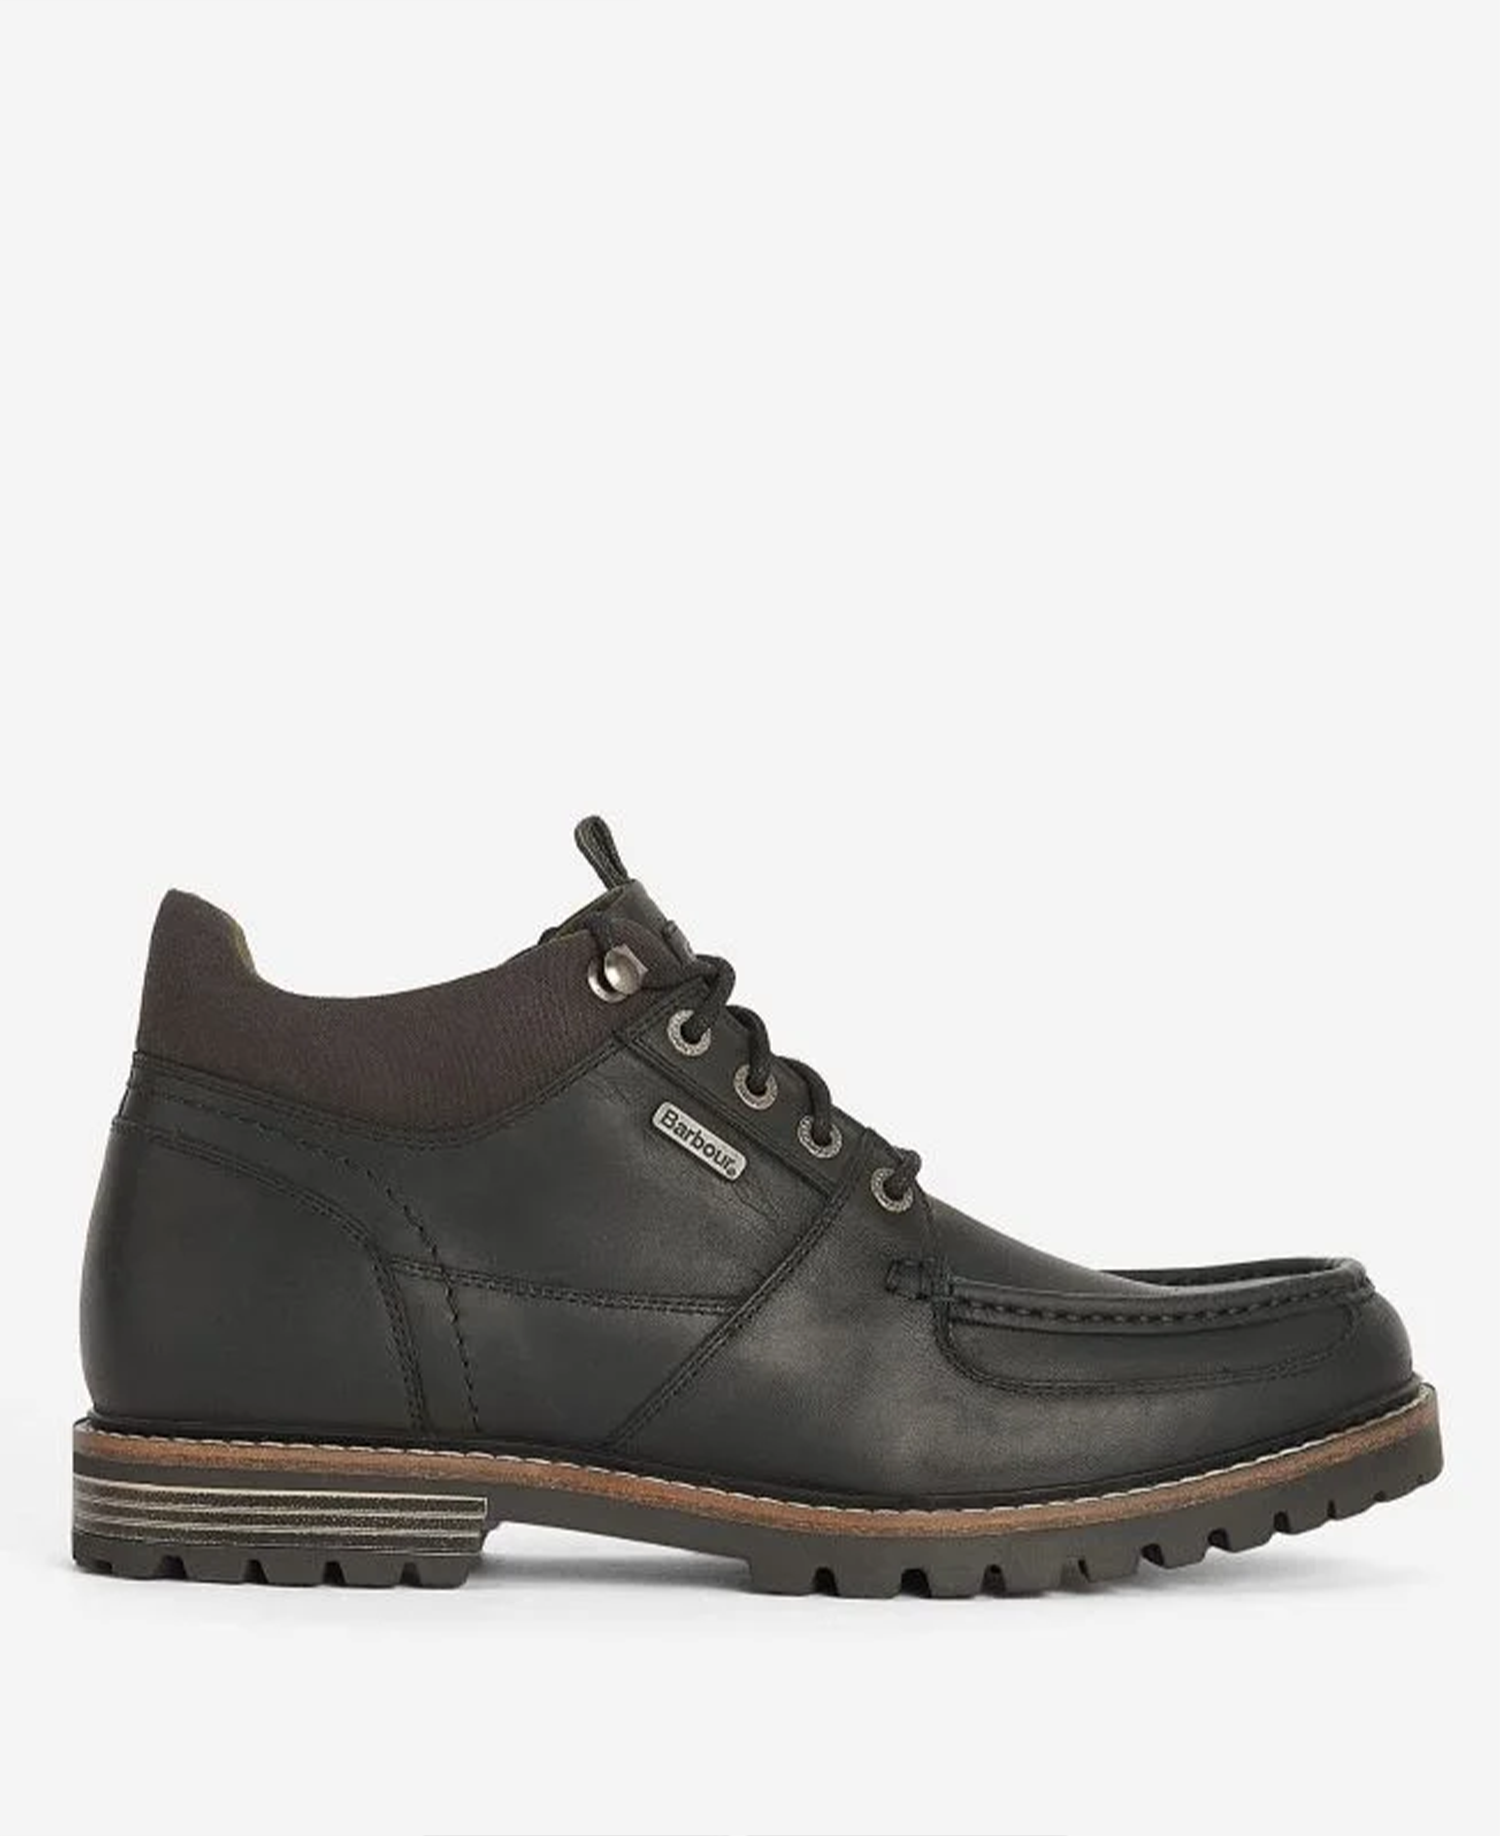 Barbour Granite Ankle Boots